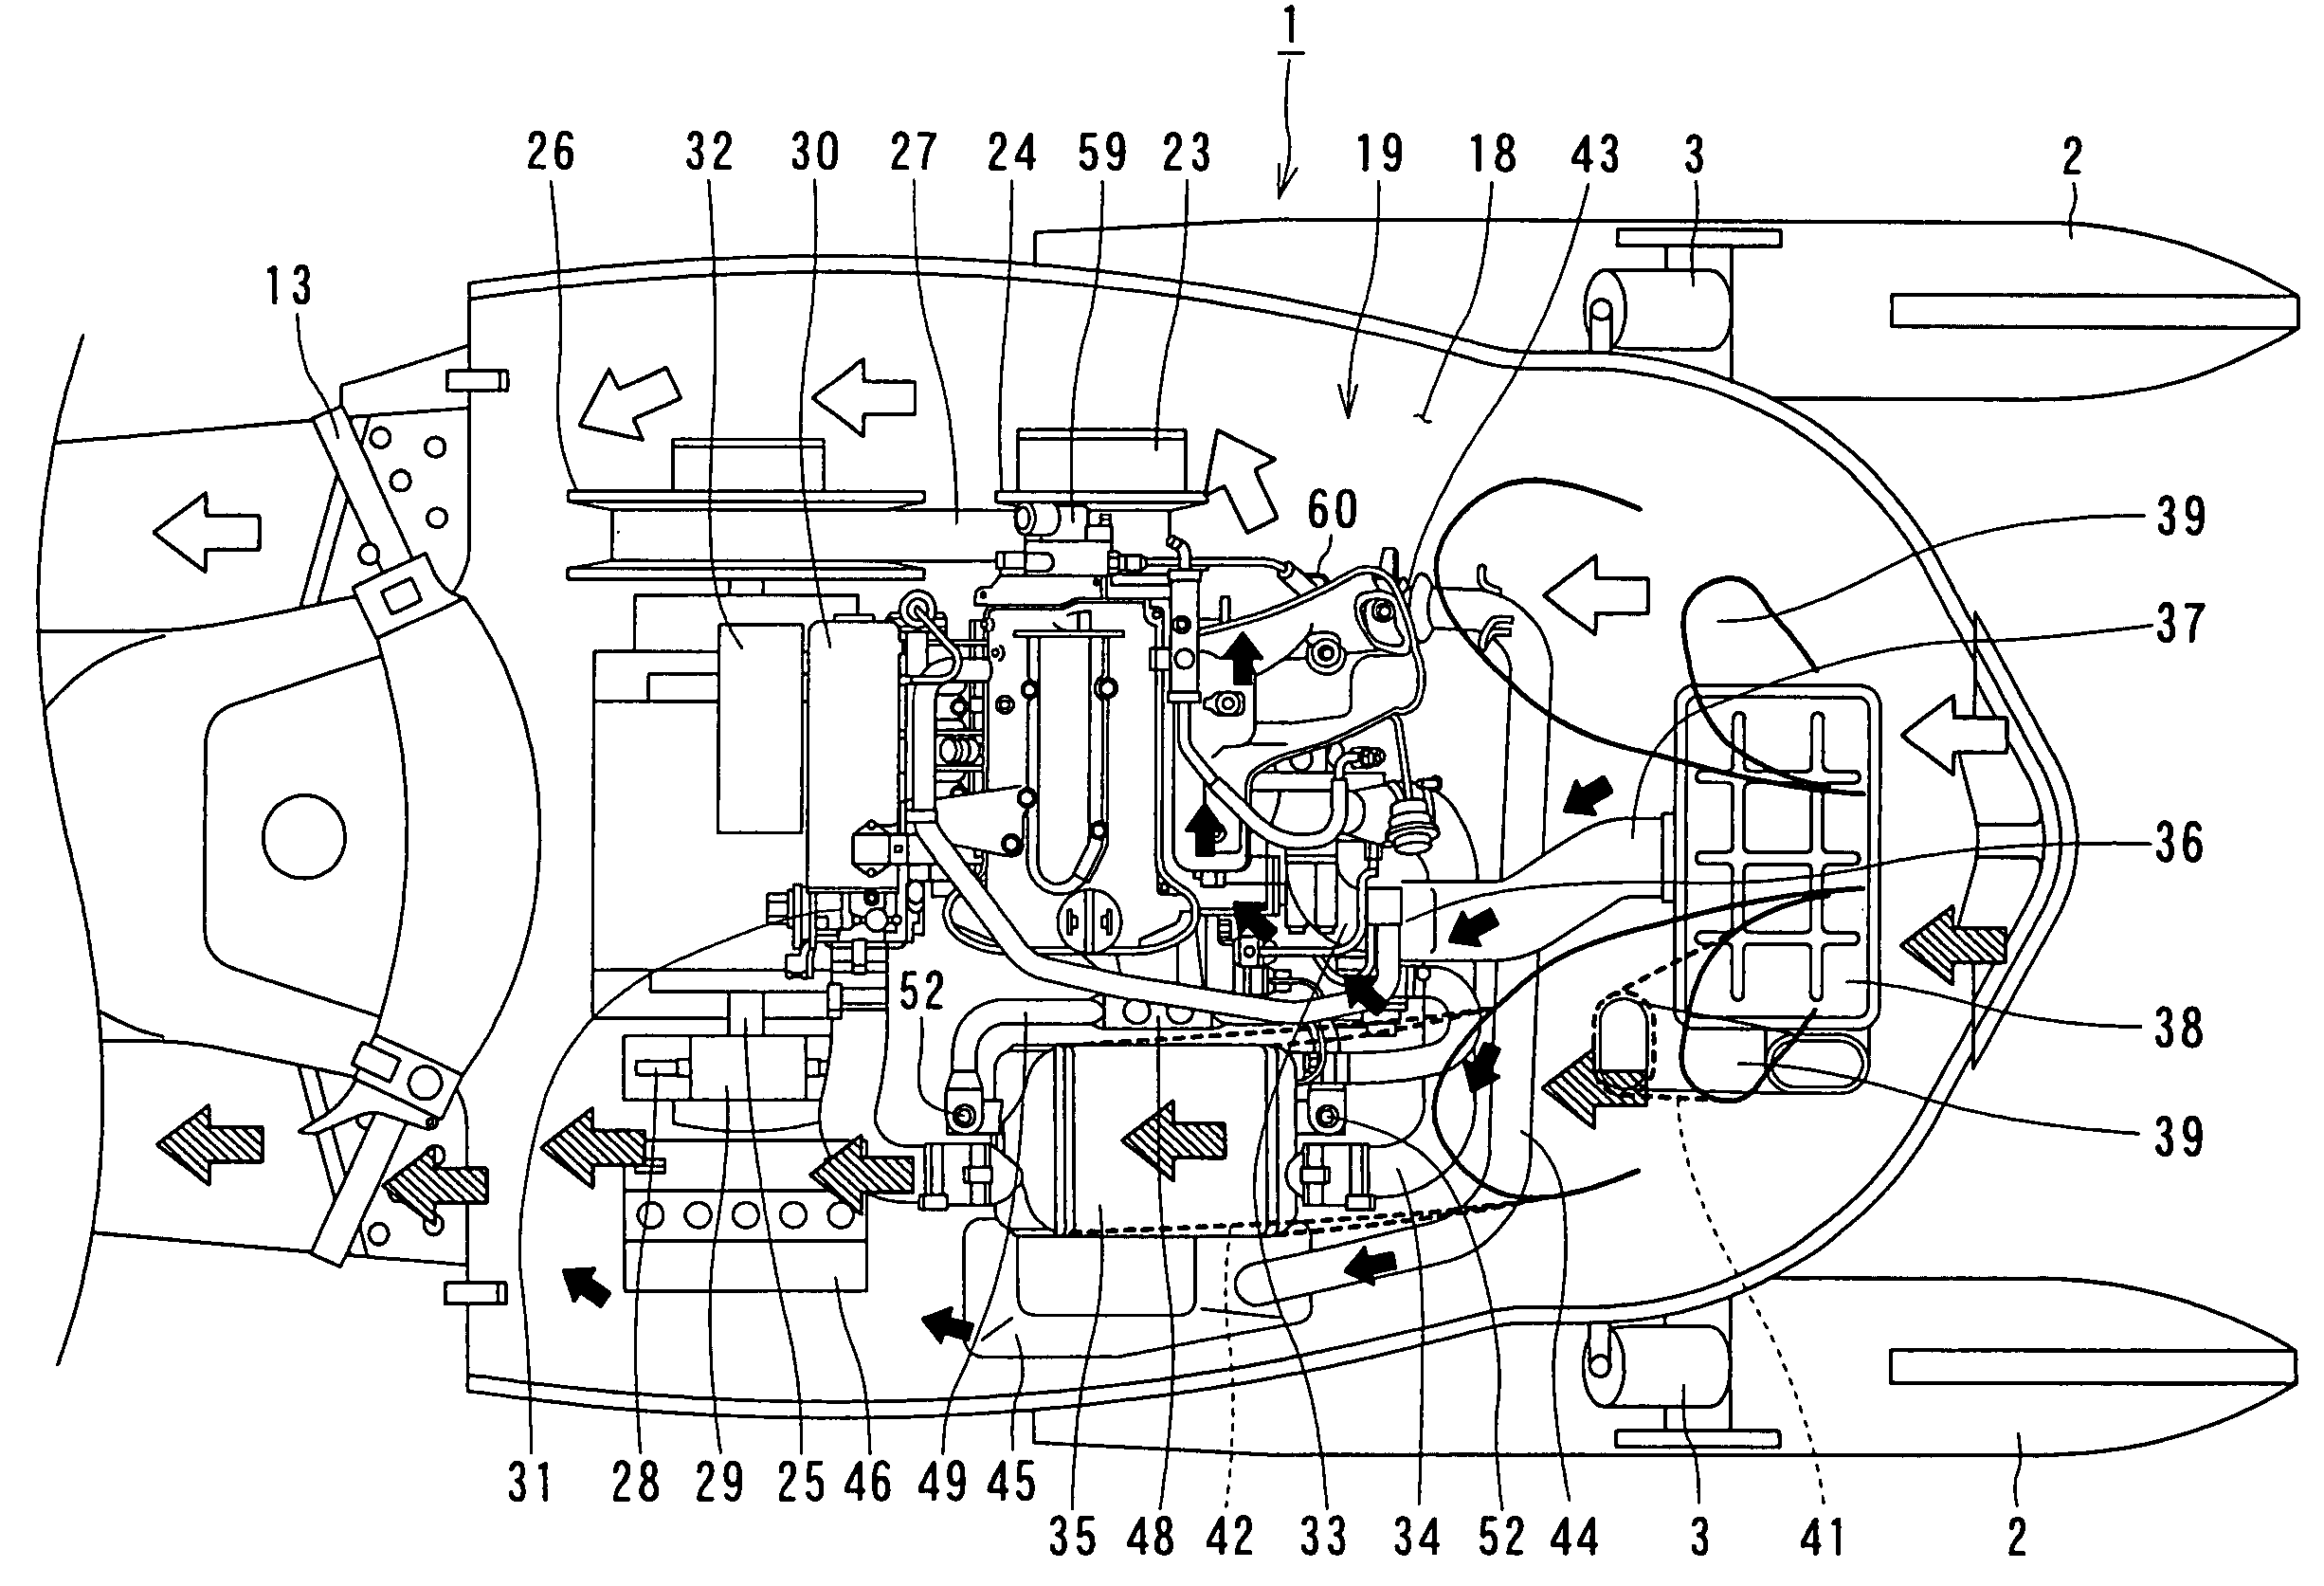 Engine structure of snowmobile